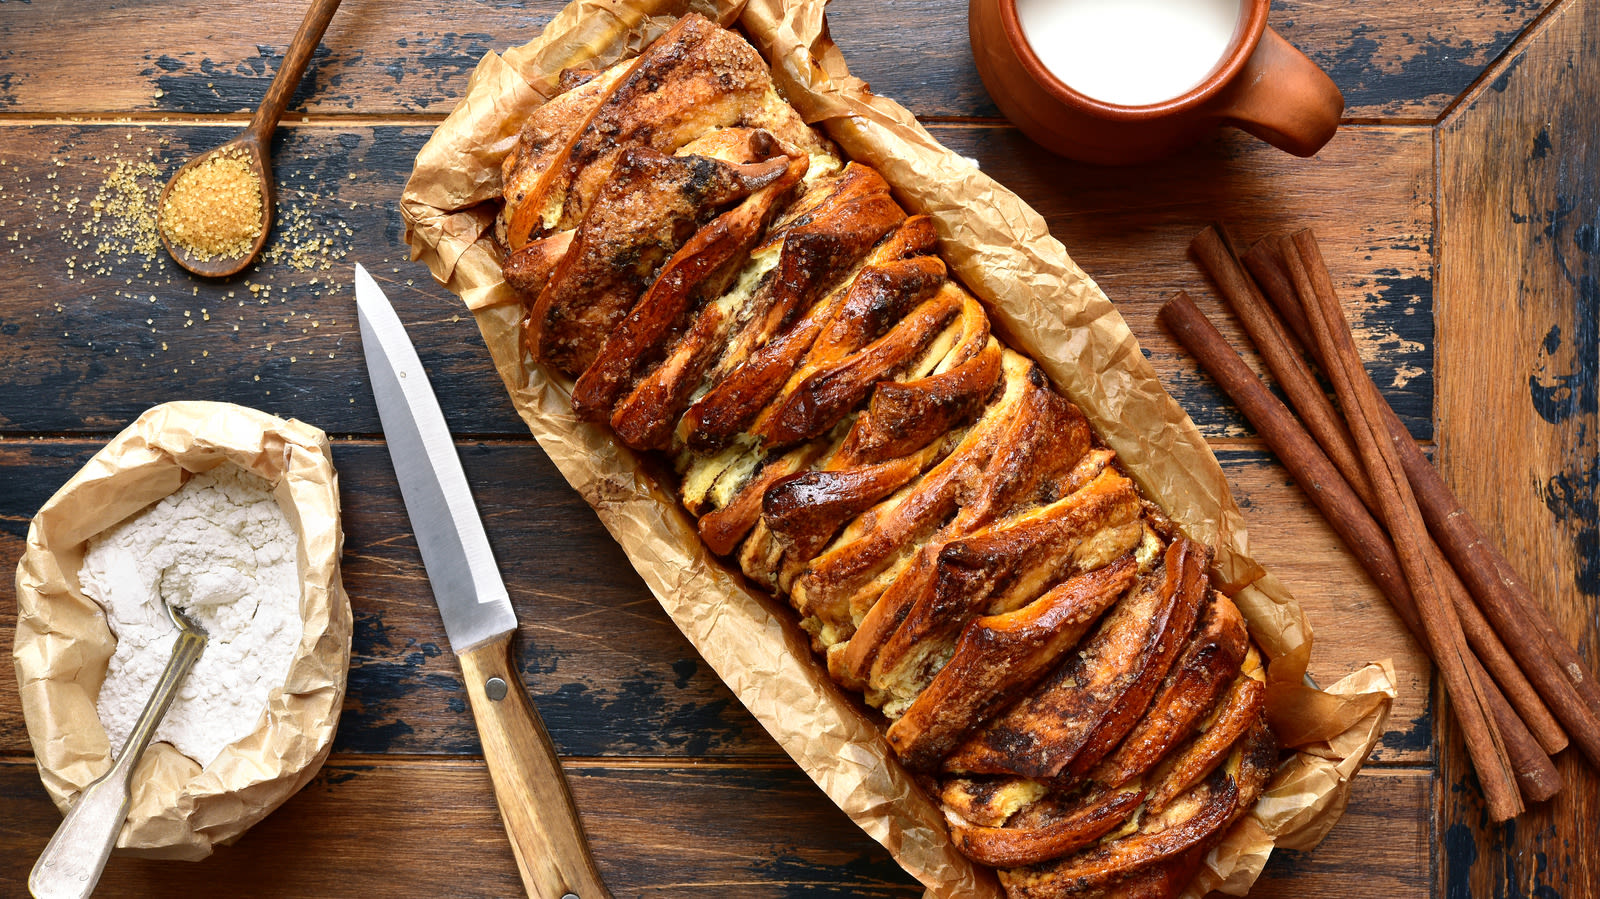 Turn Canned Cinnamon Rolls Into A Pull-Apart Loaf For An Elevated Brunch Dish